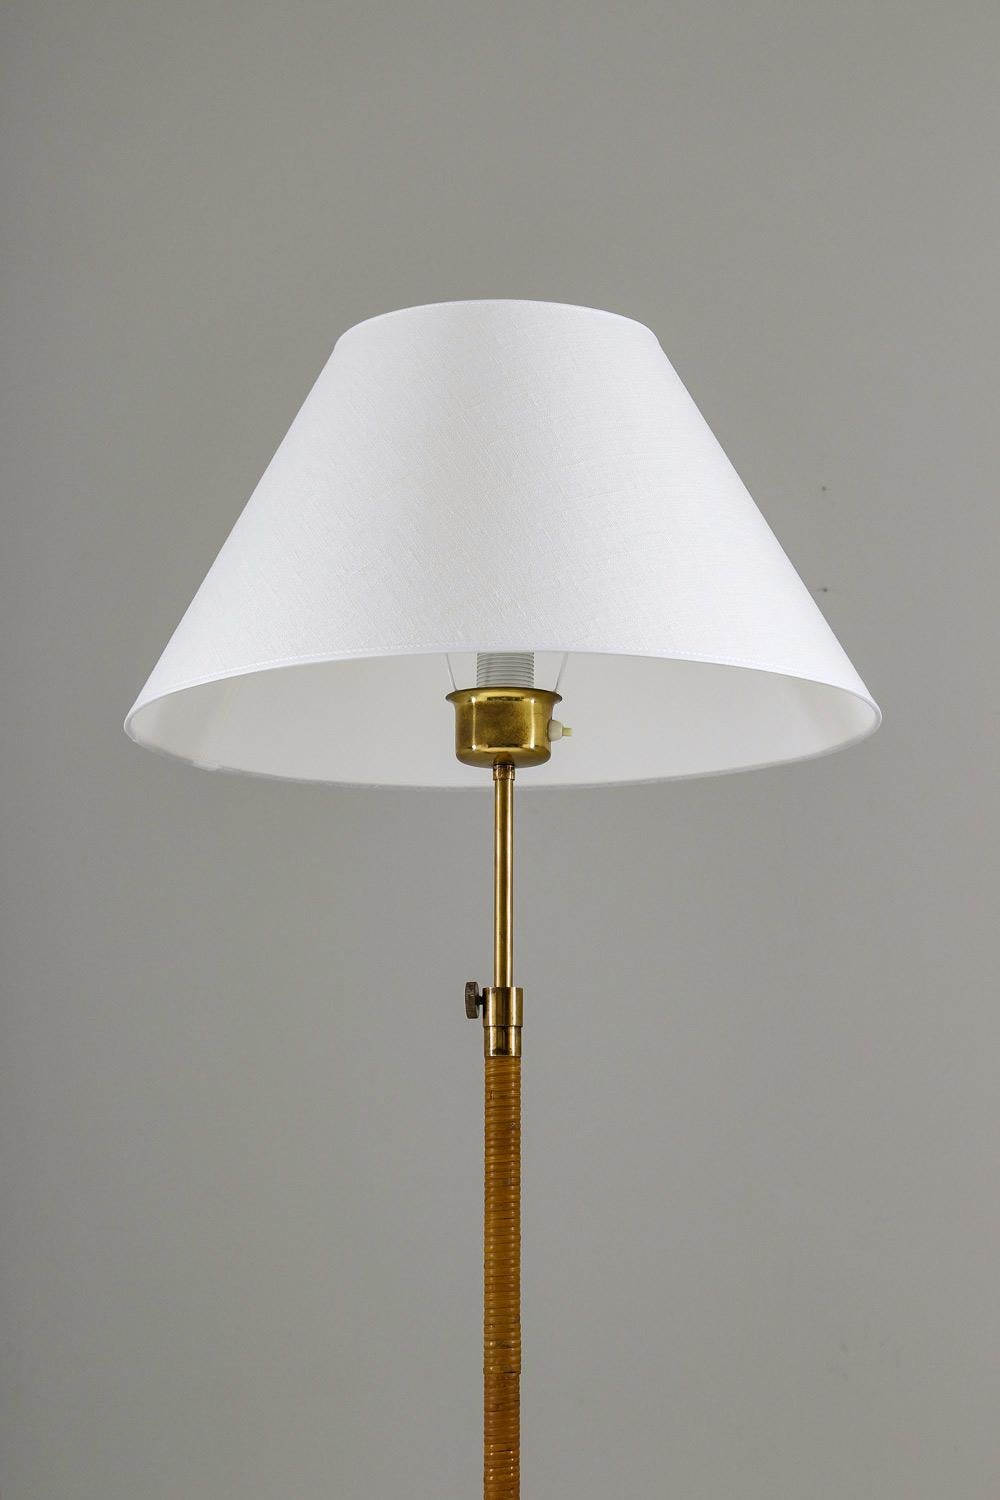 Rare floor lamp, probably manufactured by ASEA, Sweden, 1940s.
Very elegant lamp of beautiful design. The foot holding the lamp is a piece of art in itself and has perfect patina. The pole is entwined in rattan, with details in brass, such as the